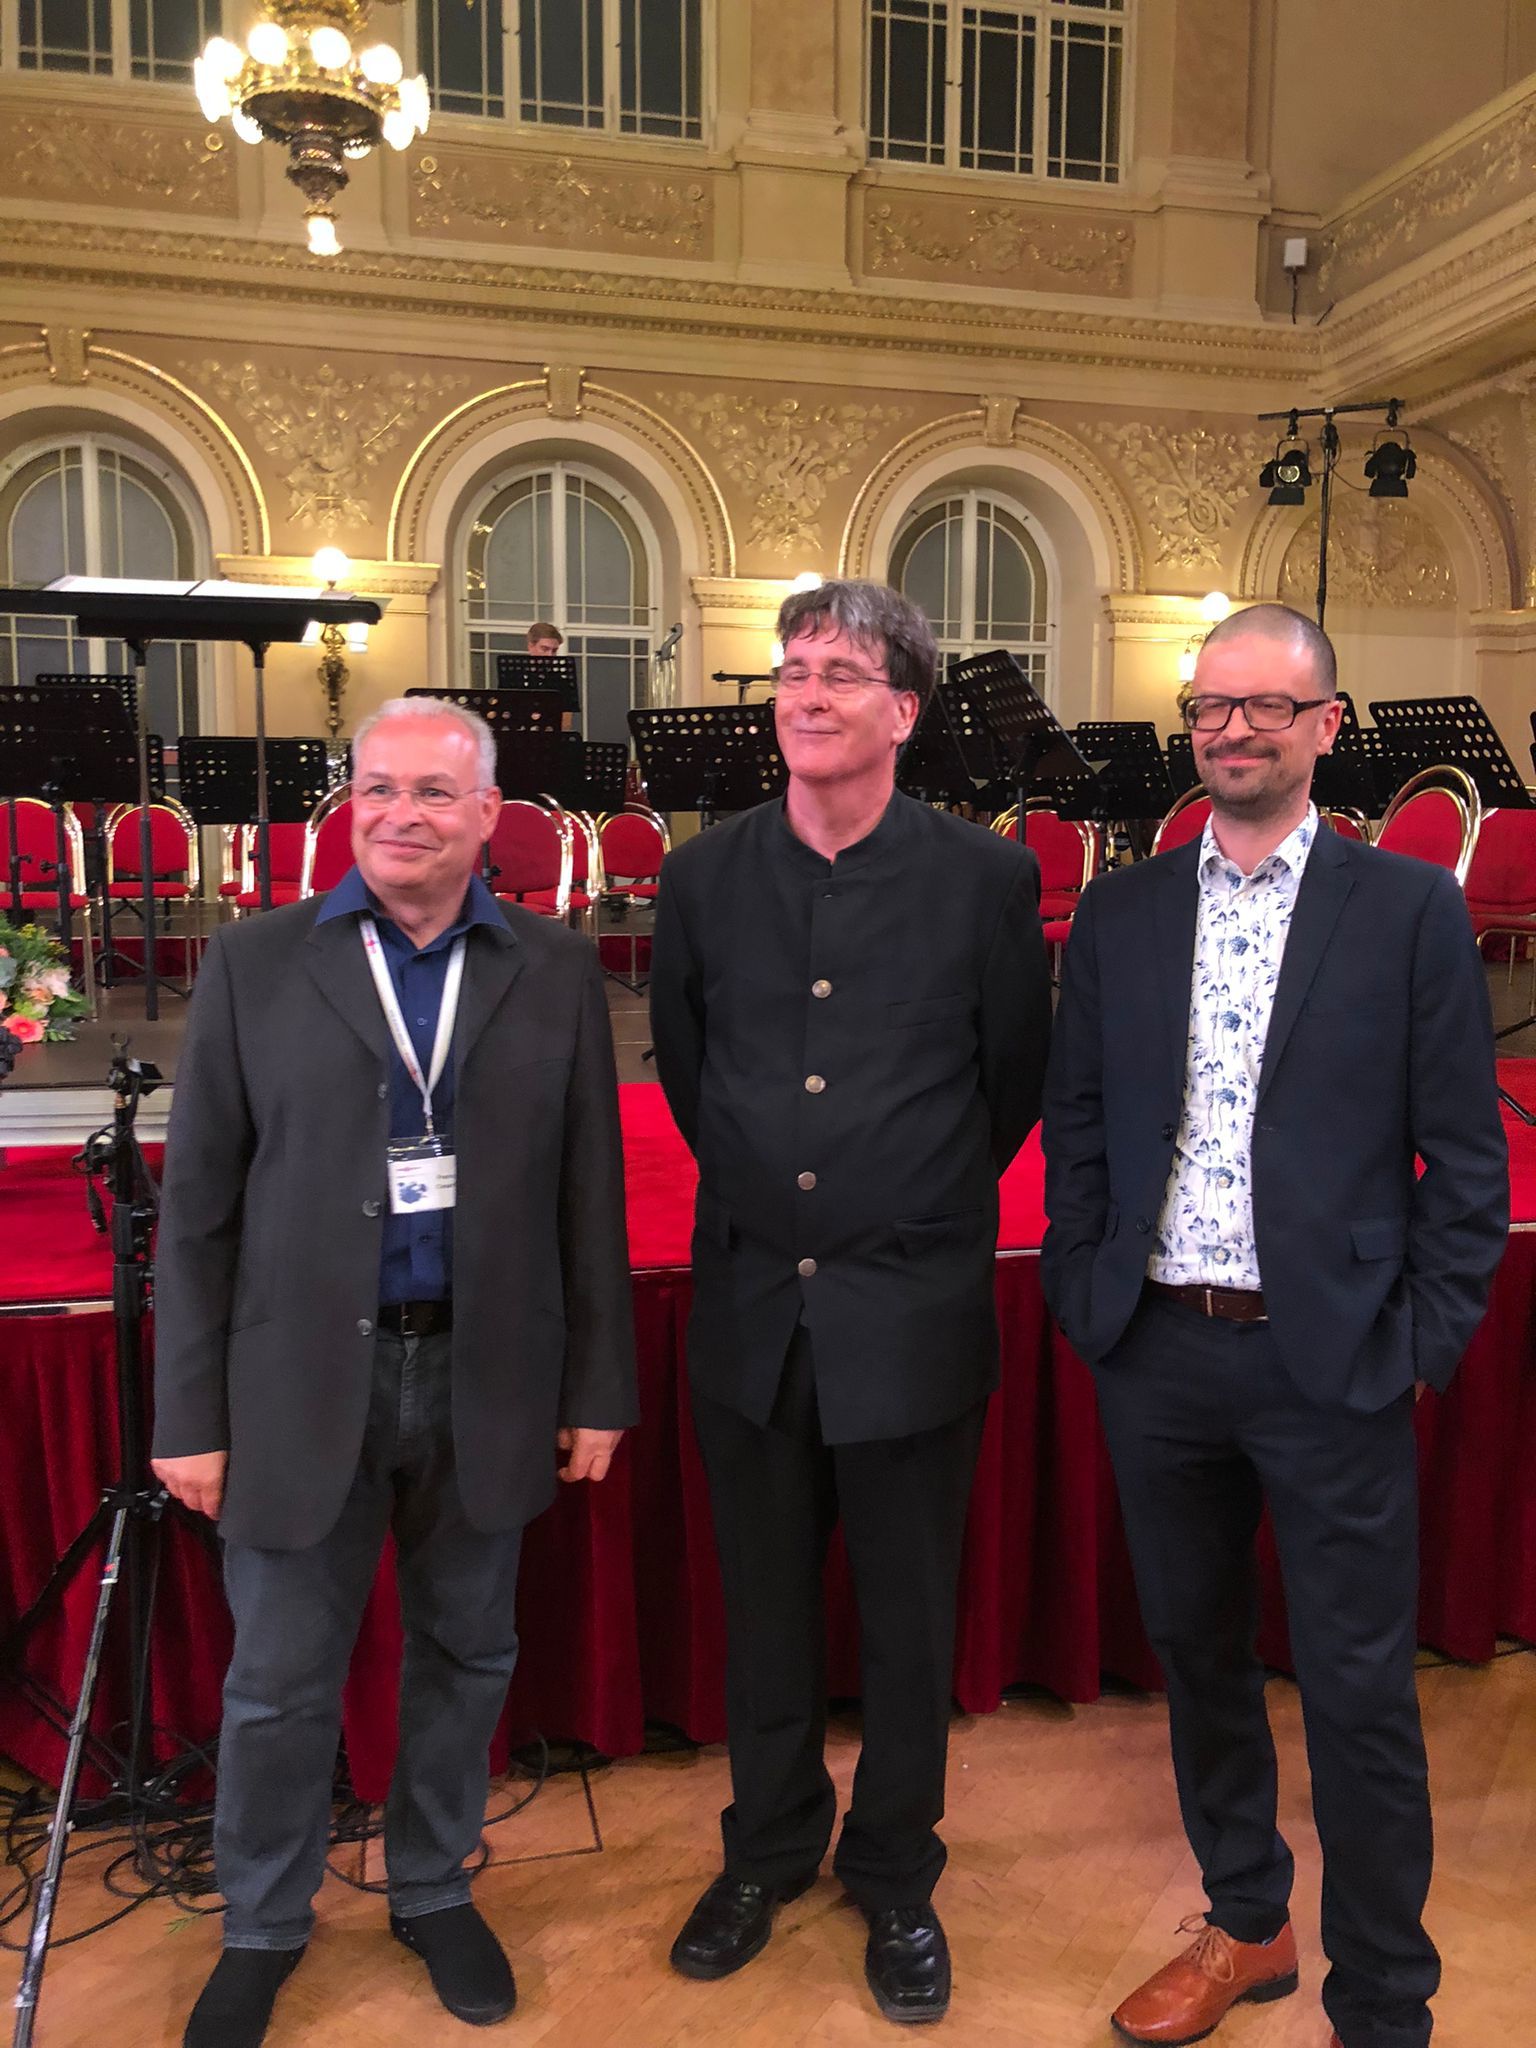 Franco Cesarini, Rolf Schumacher & Stephan Hodel at the WASBE Conference in Prague (Czech Republic), 22nd July 2022